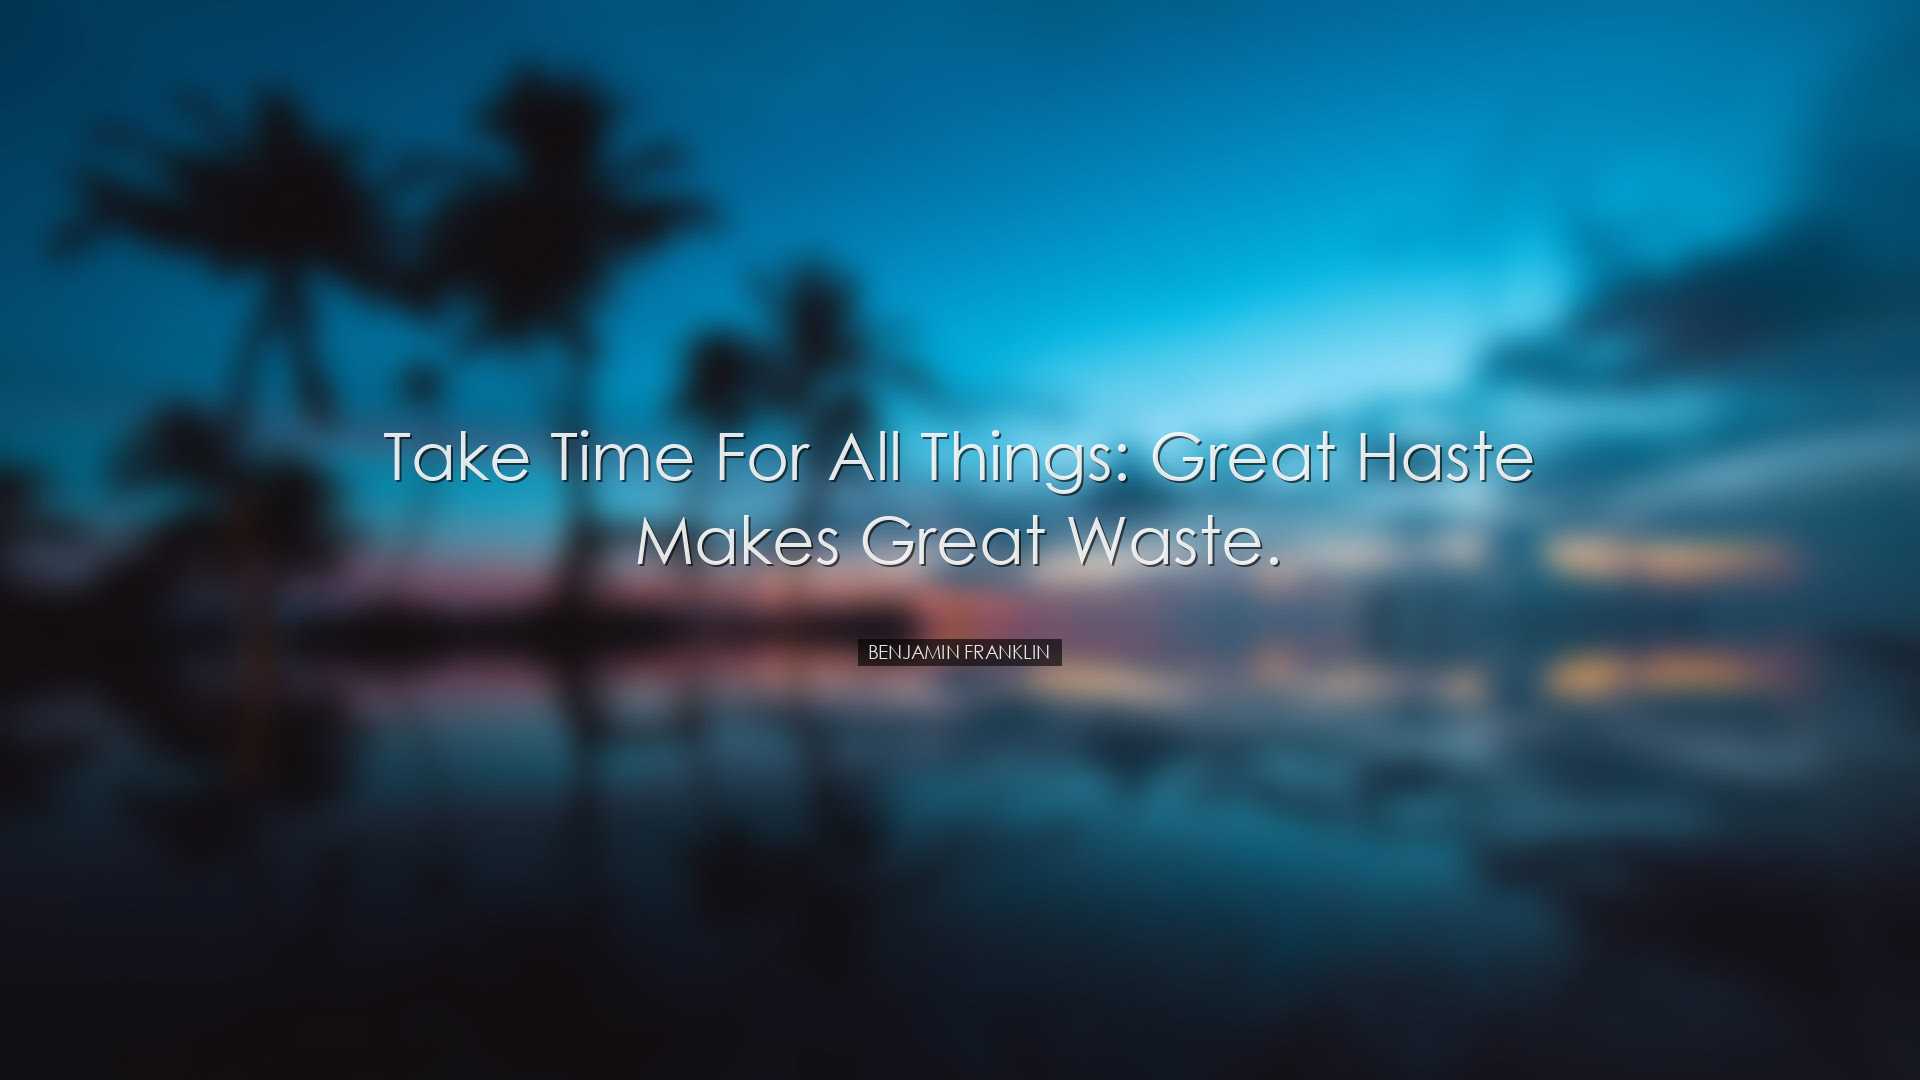 Take time for all things: great haste makes great waste. - Benjami